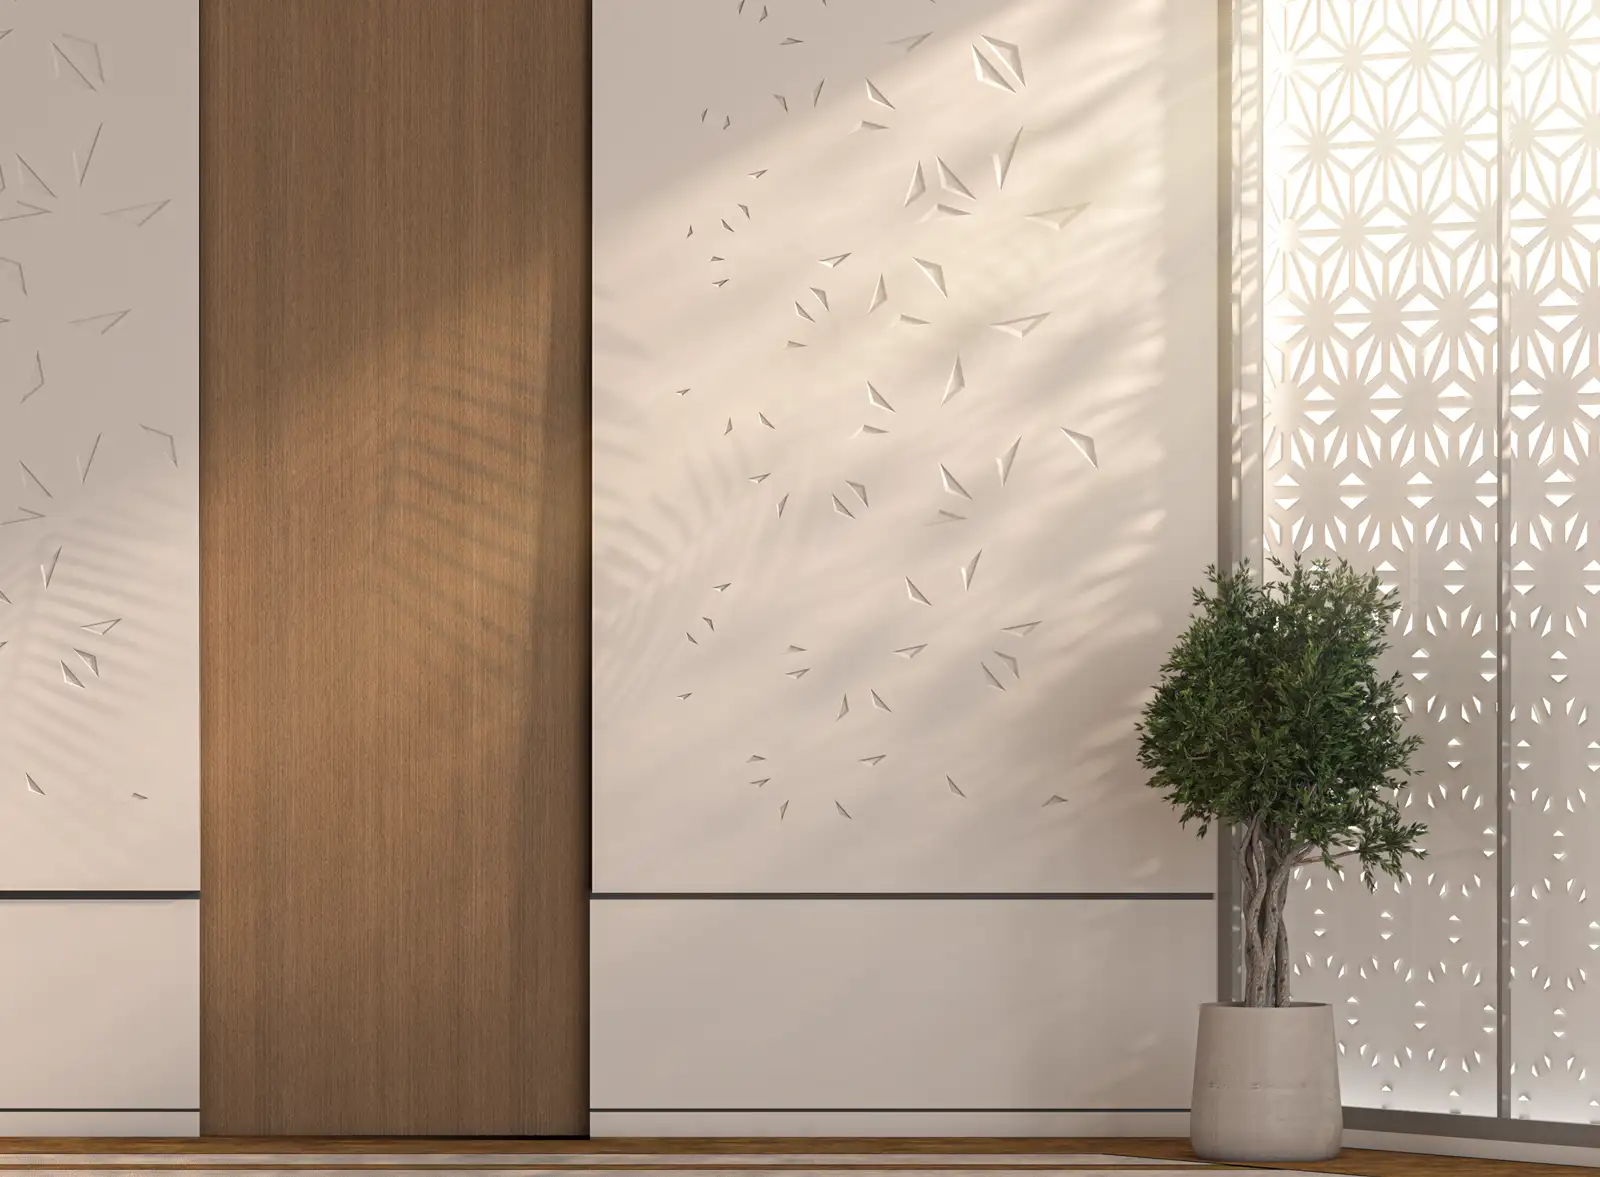 Minimalist mosque interior with a serene ambiance, featuring a wooden column, a potted olive tree, and a delicately patterned jali screen allowing light to filter through, creating a play of shadows and light for a contemplative and spiritual atmosphere.